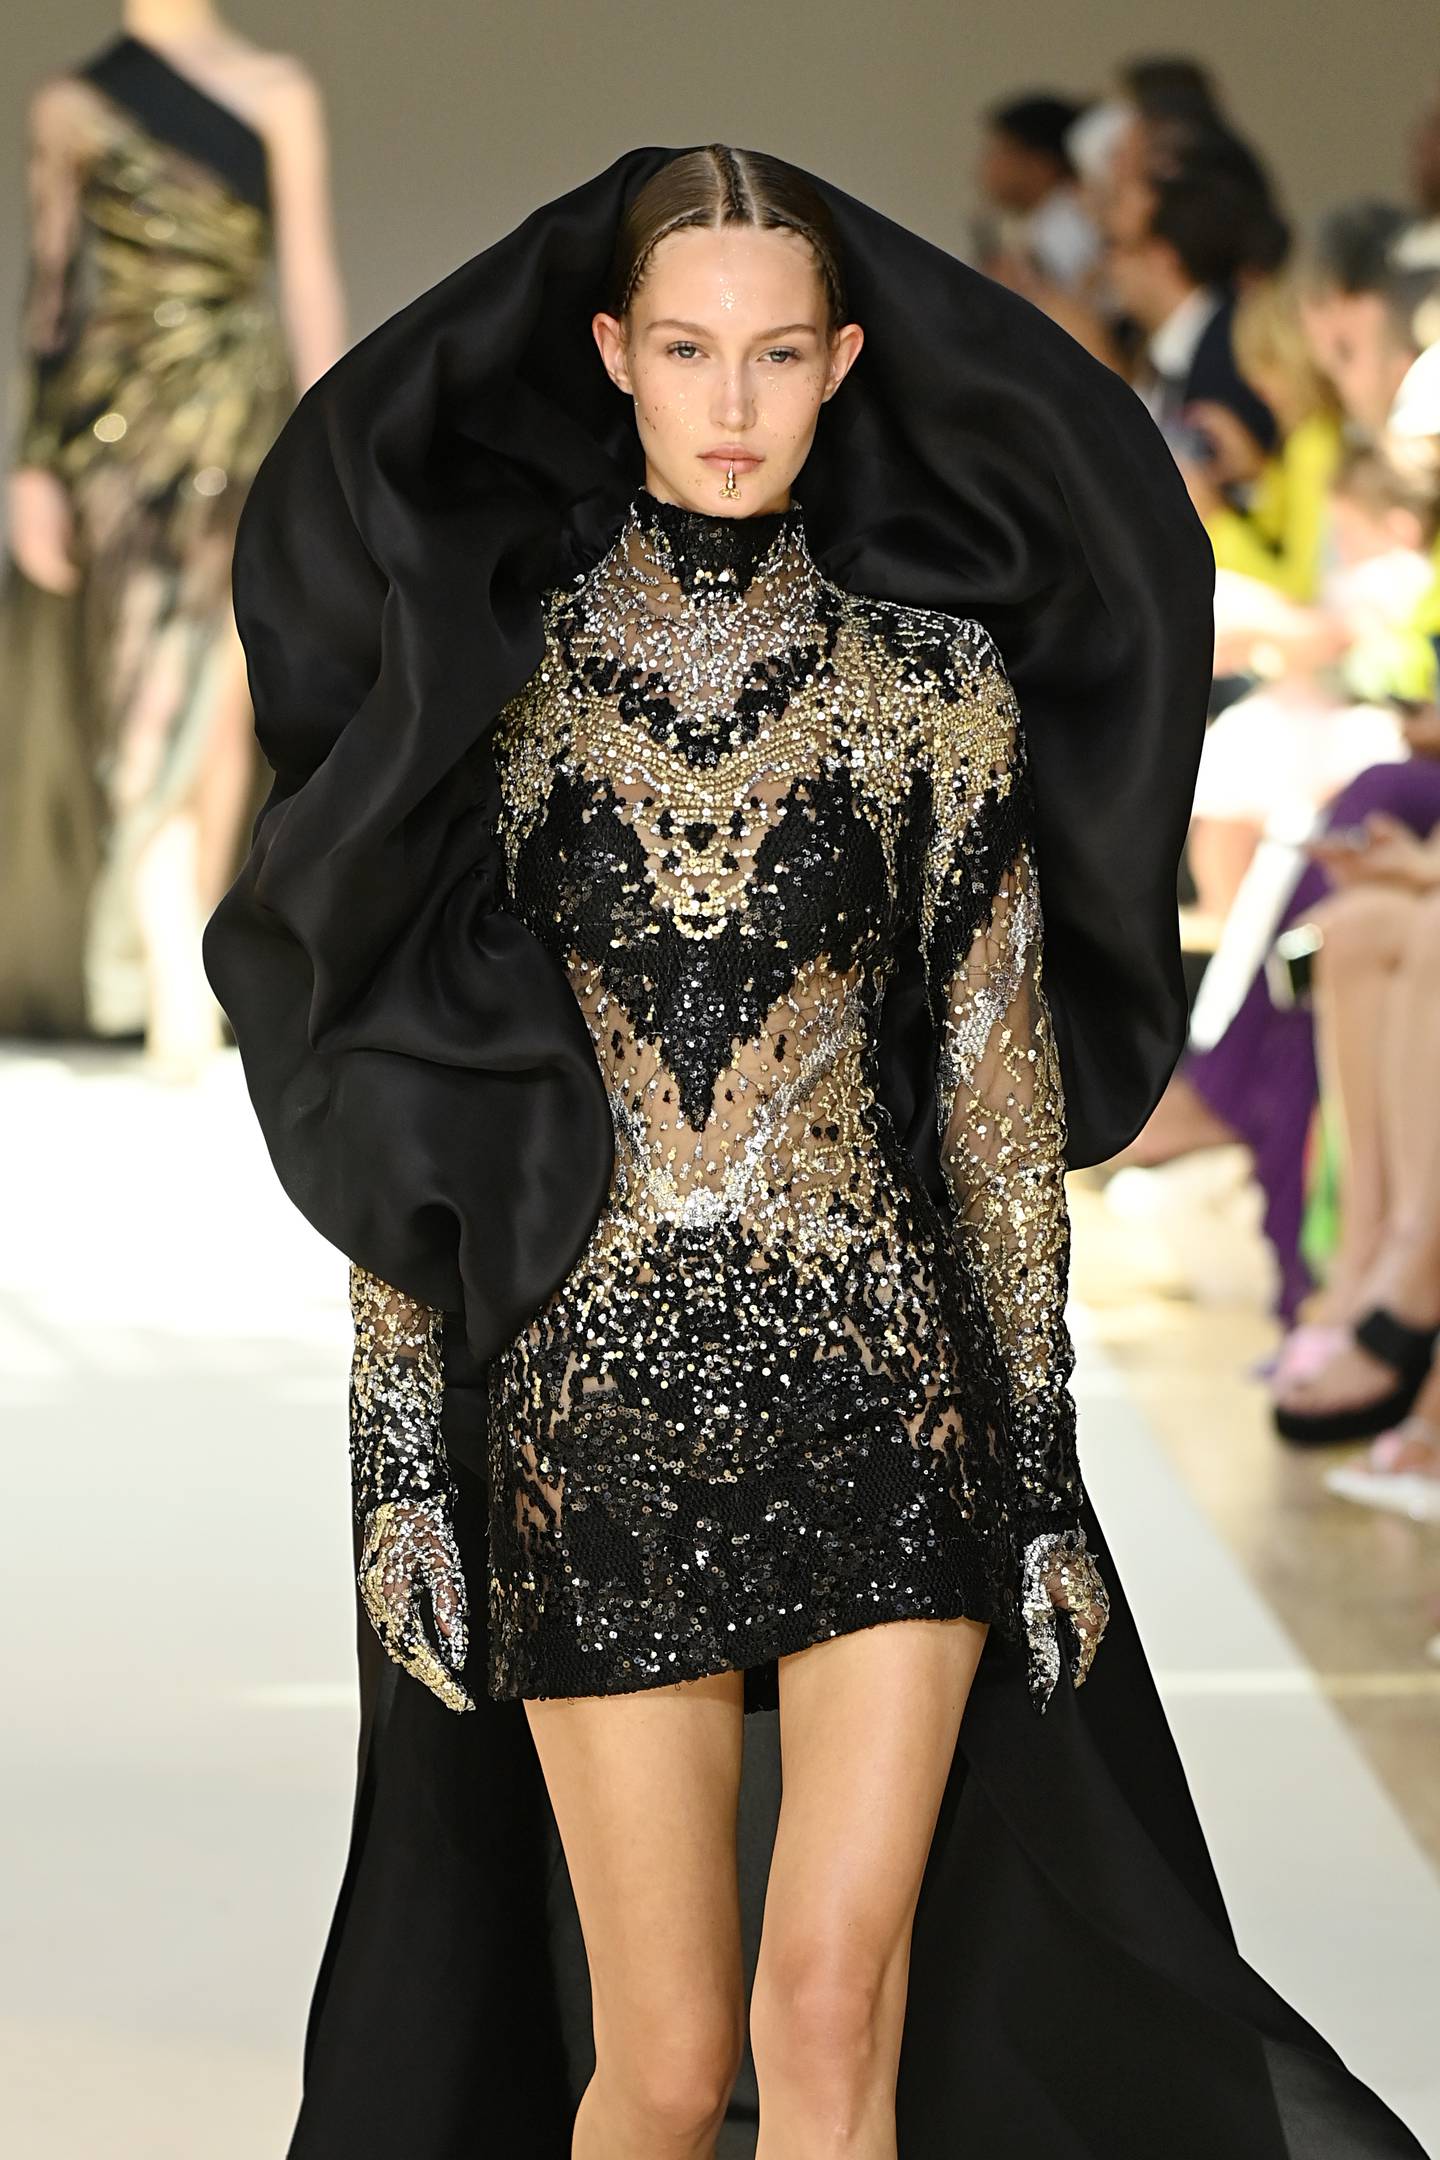 The Elie Saab haute couture autumn/winter 2022-23 show delivered a new softness over Saab's trademark handwork, seen here as a cowled hood, over a decorated mini dress. Getty Images